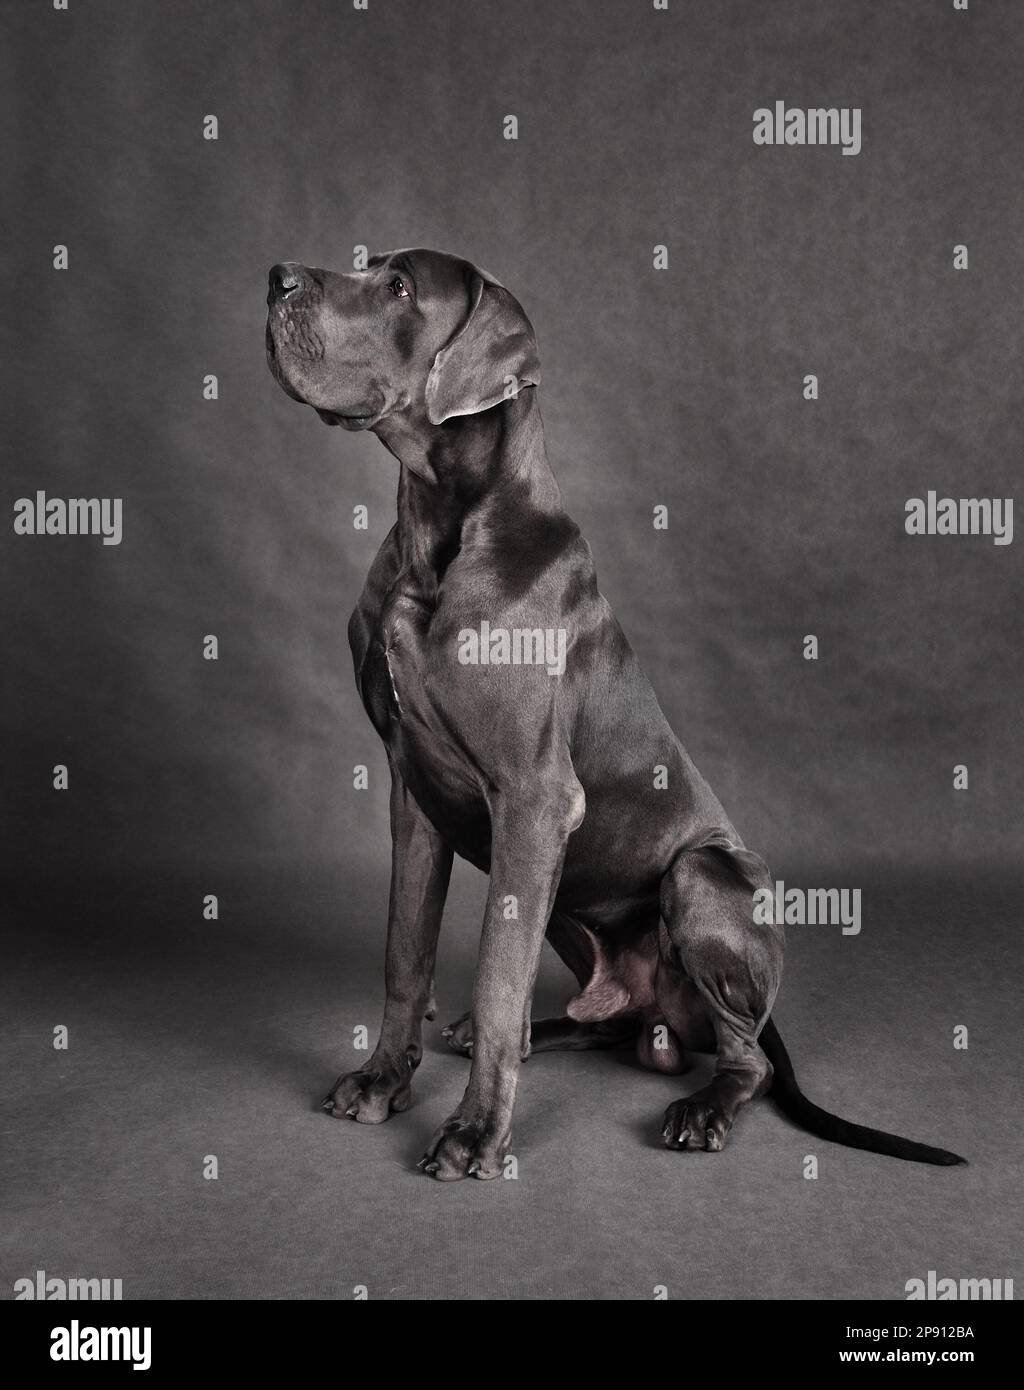 Studio shot of sitting Great Dan dog with uncropped ears on a gray background Stock Photo